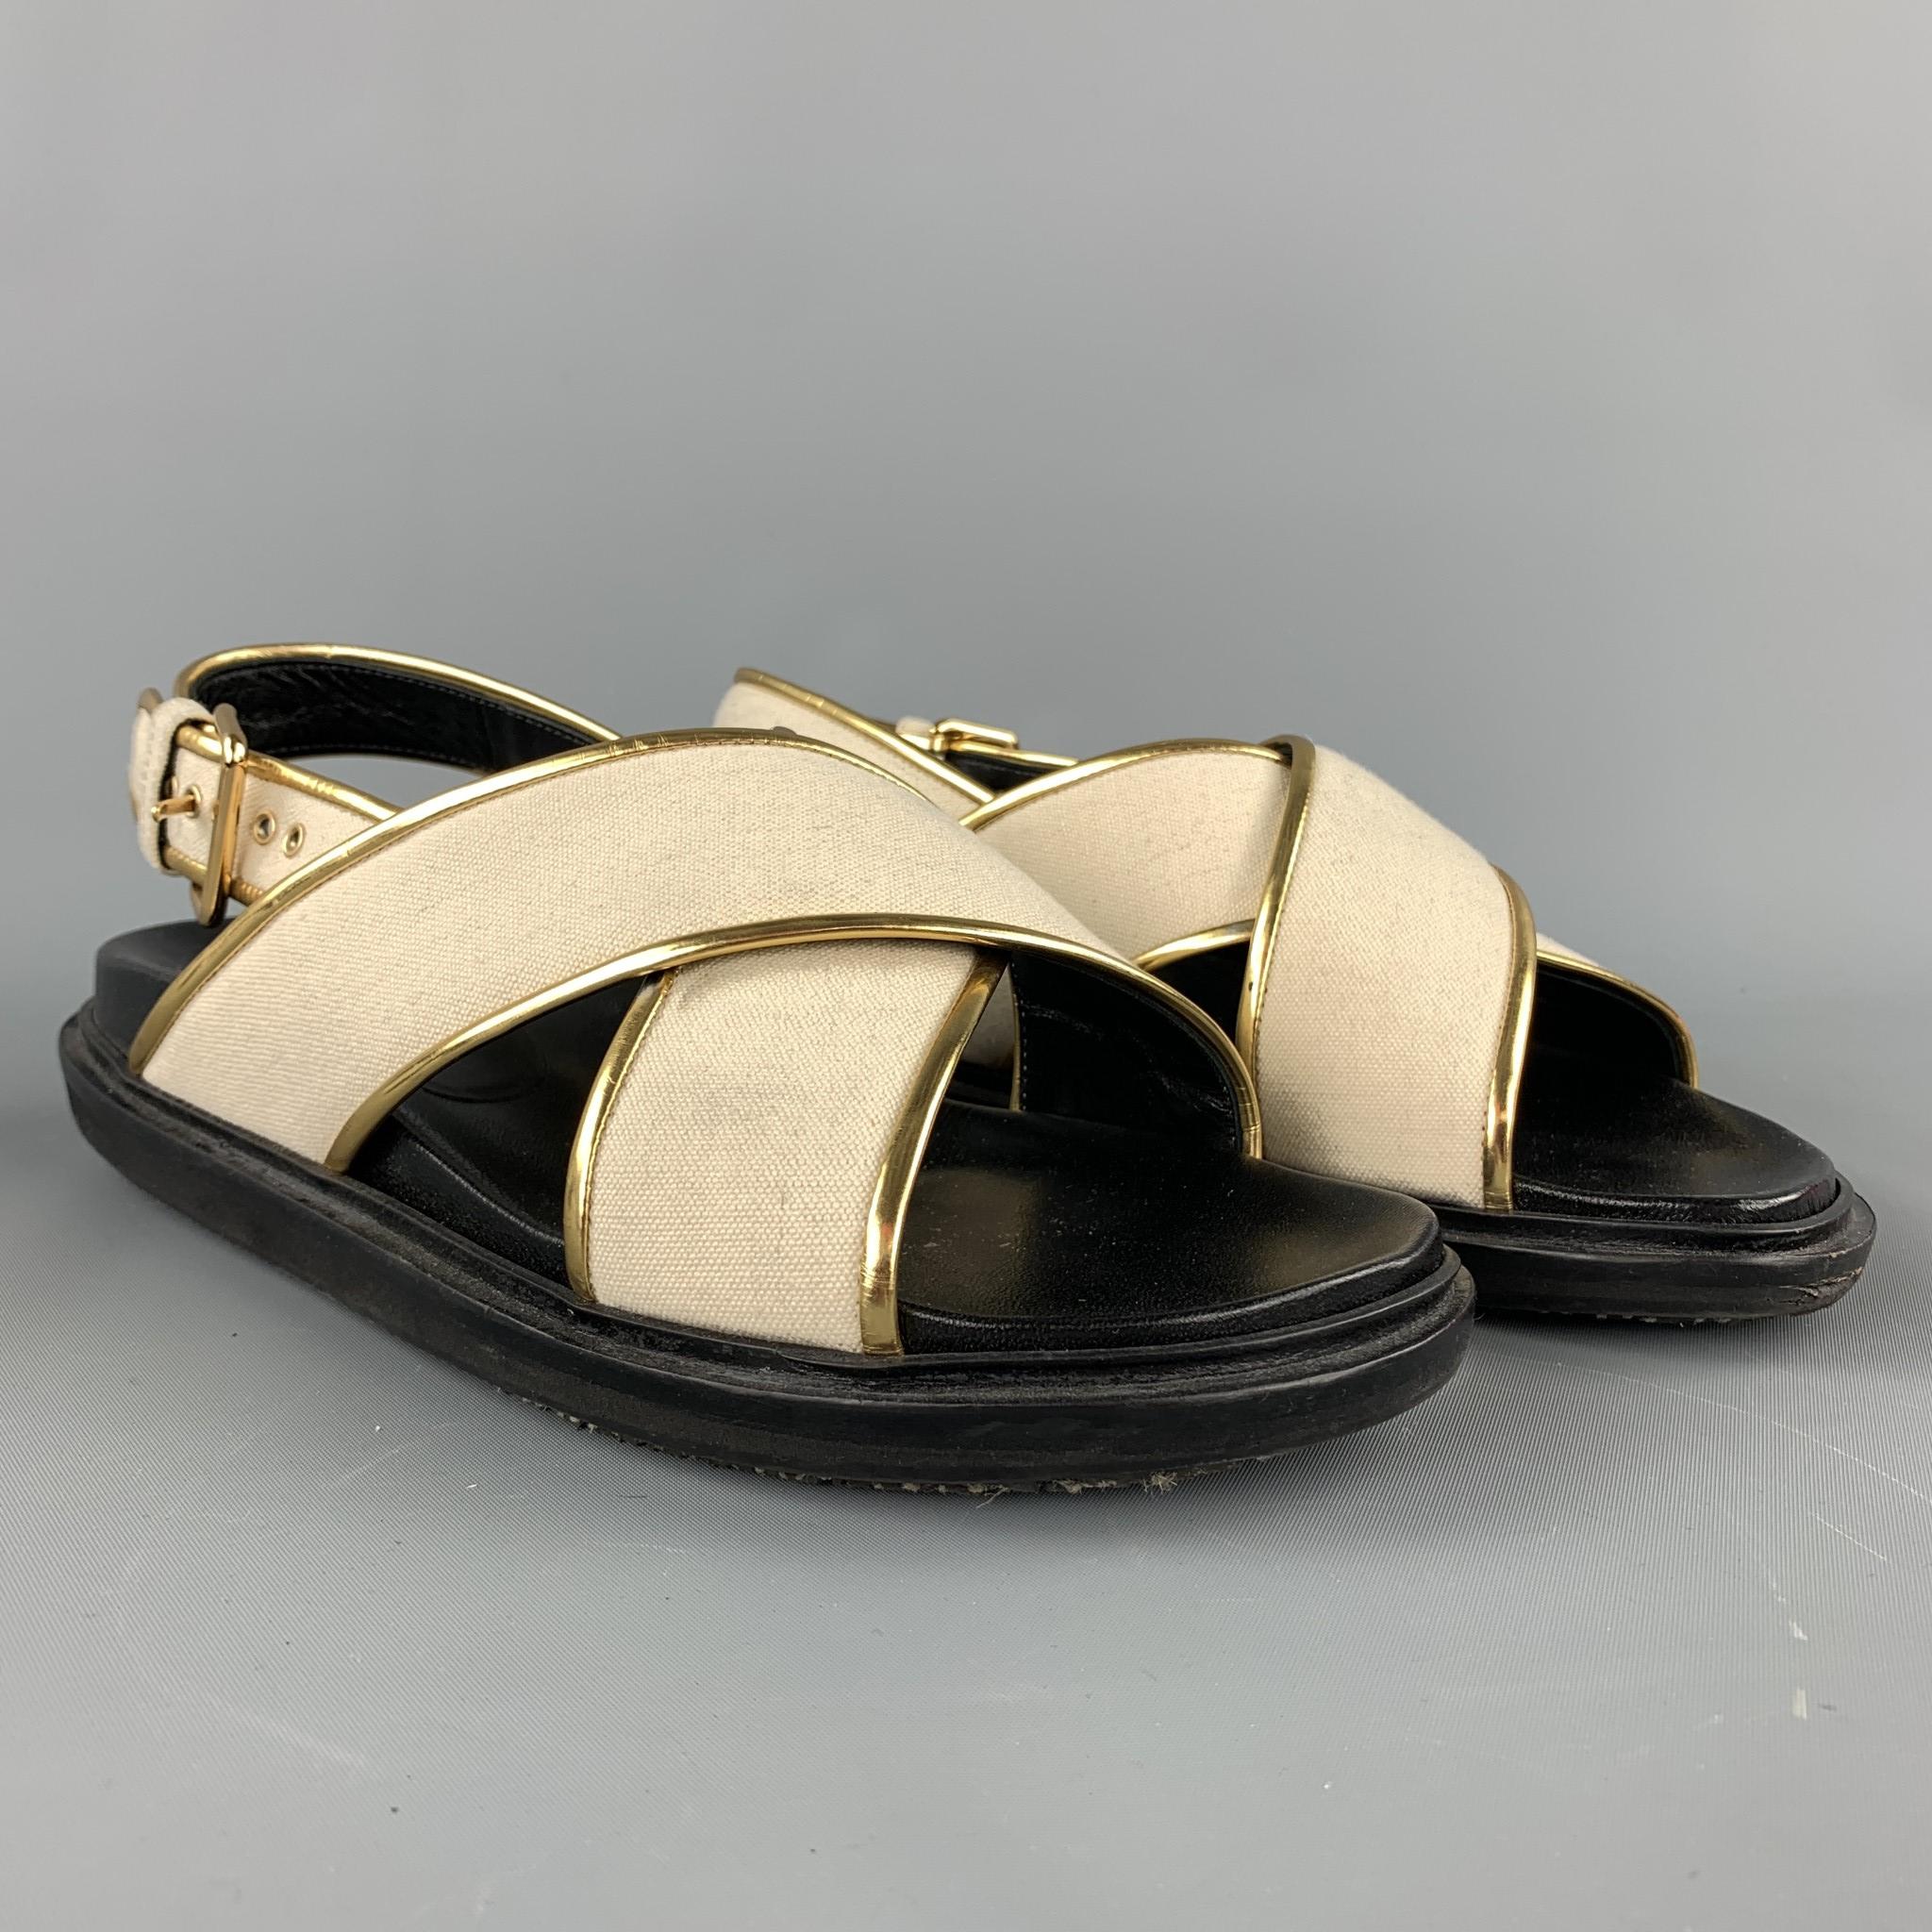 MARNI sandals comes in a black & beige canvas with a gold trim featuring a belt buckle closure. Made in Italy.

Very Good Pre-Owned Condition.
Marked: EU 38

Outsole:

10 in. x 4 in. 